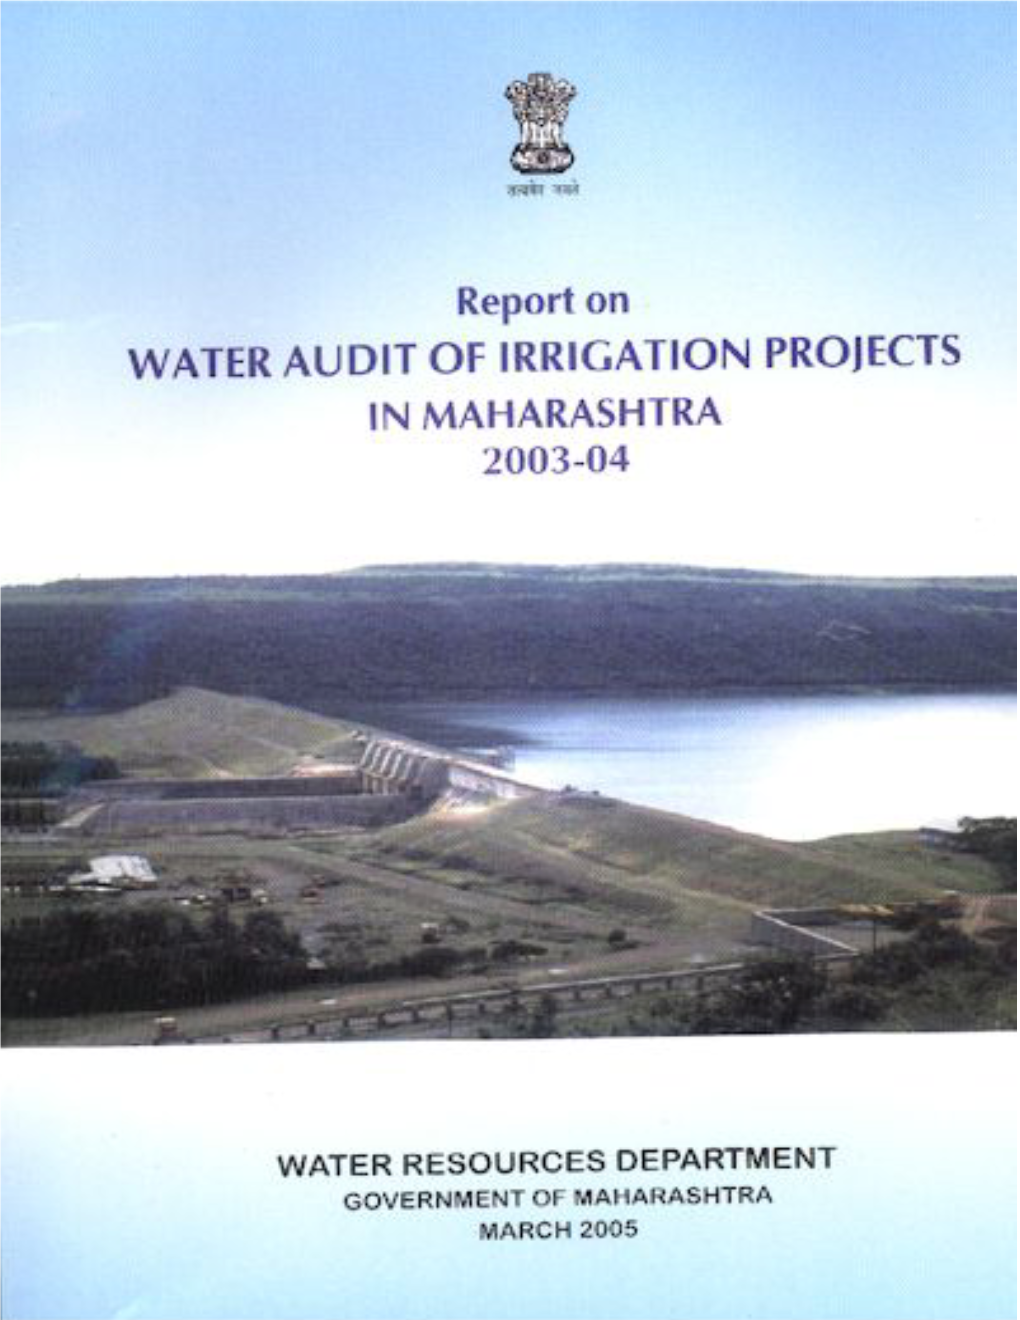 Water Audit of Irrigation Projects in Maharashtra 2003-04